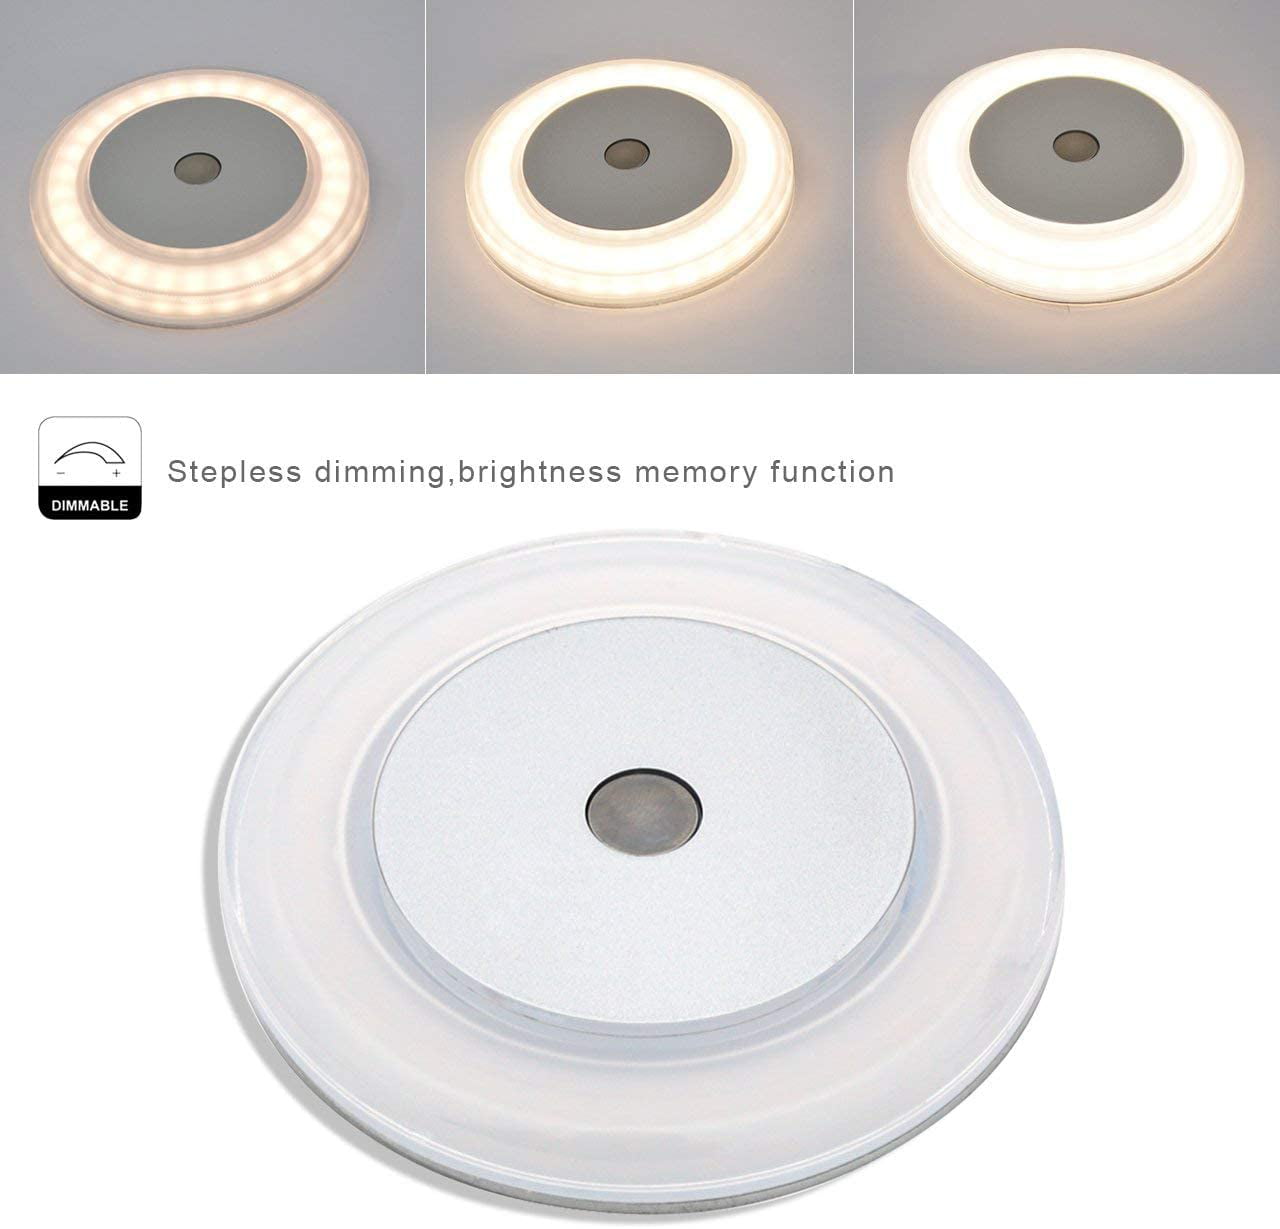 Stepless Dimmable Genuine Marine DC 12V 3W 2800K Soft White Full Aluminum Tap Light 2 Pk RV Boat Touch Ceiling LED Light Stainless Steel Screws Included Surface Mount and Hidden Fasteners Design 